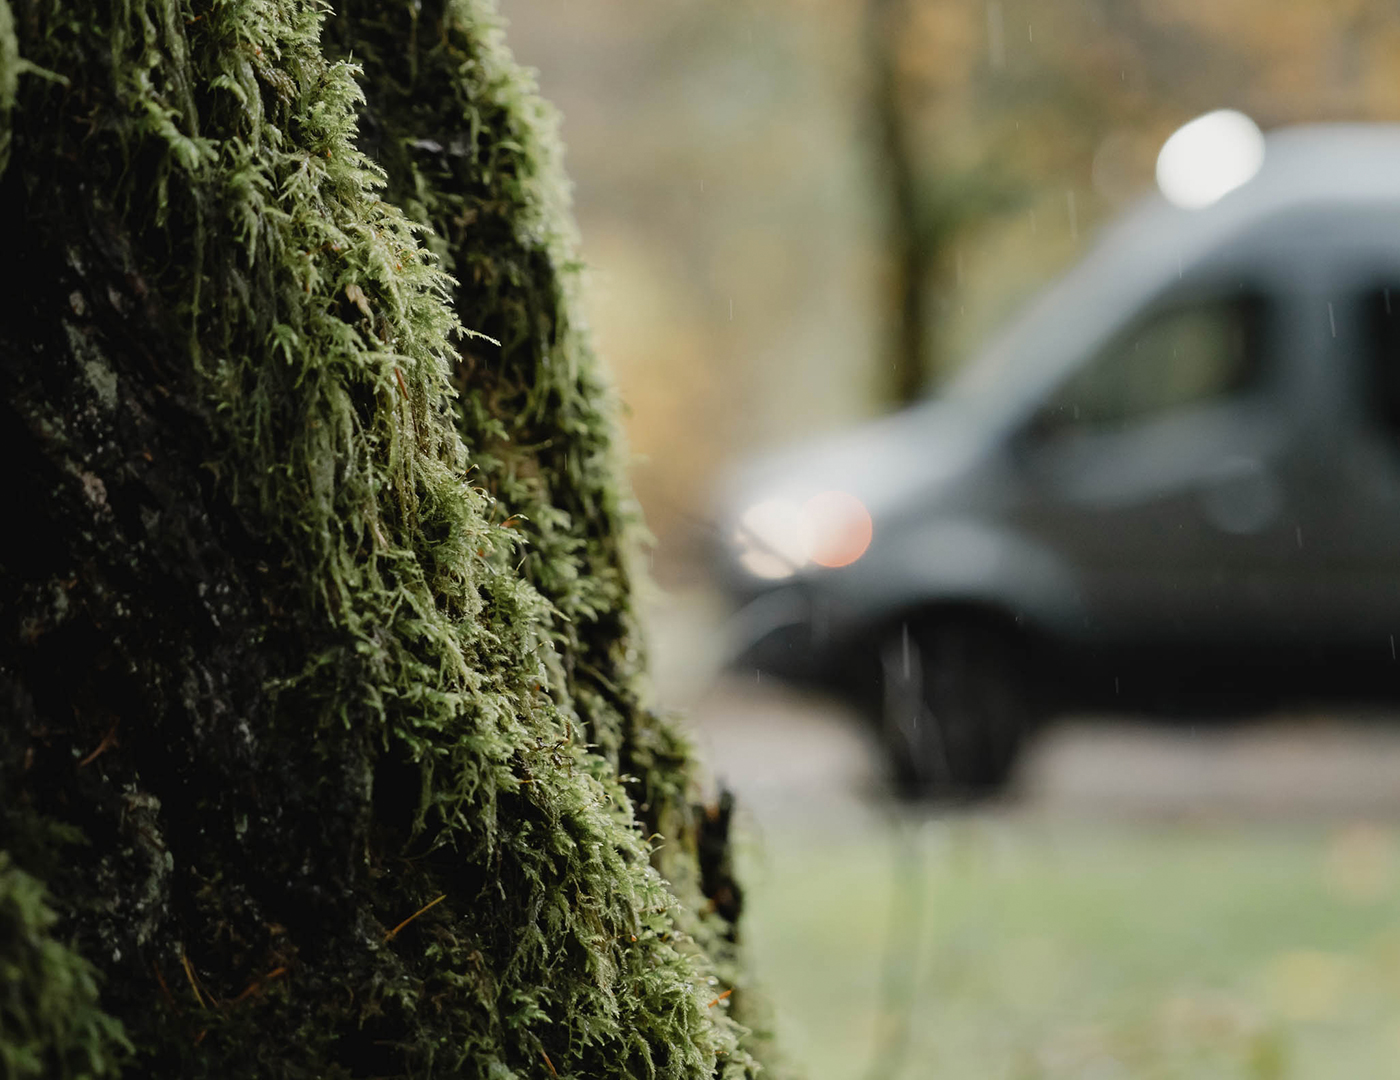 Green moss on a tree with a blurry van in the background